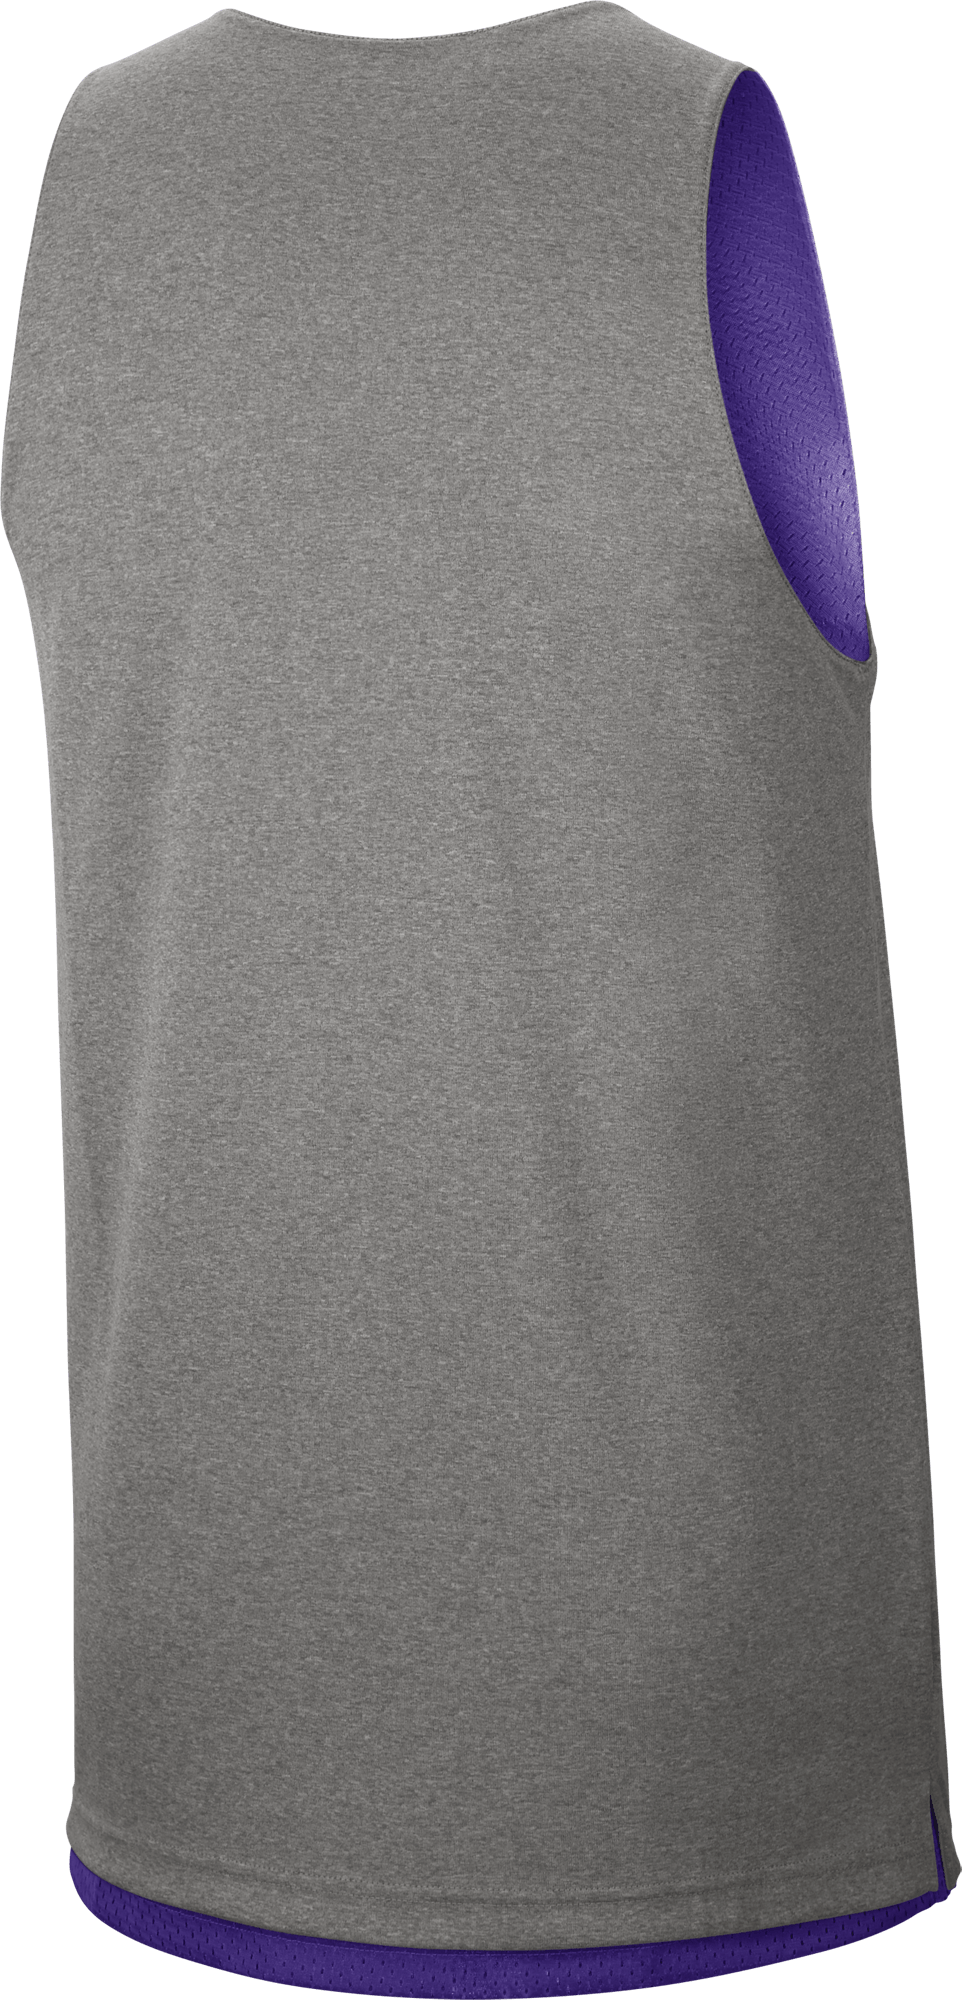 Lakers Standard Issue Reversible Tank